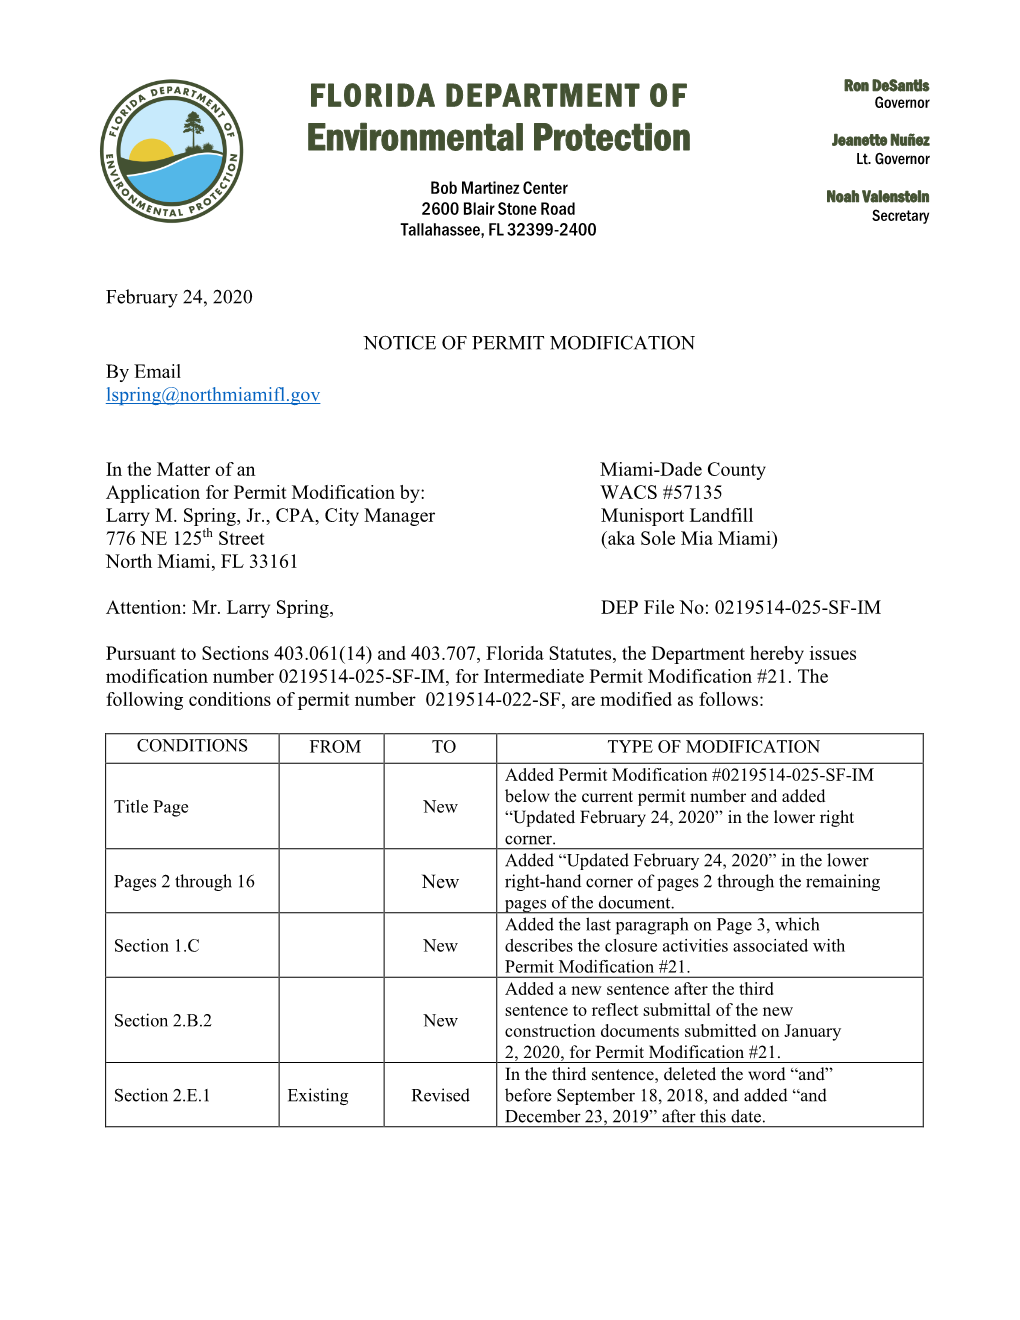 Florida Department of Environmental Protection on December 9, 2019